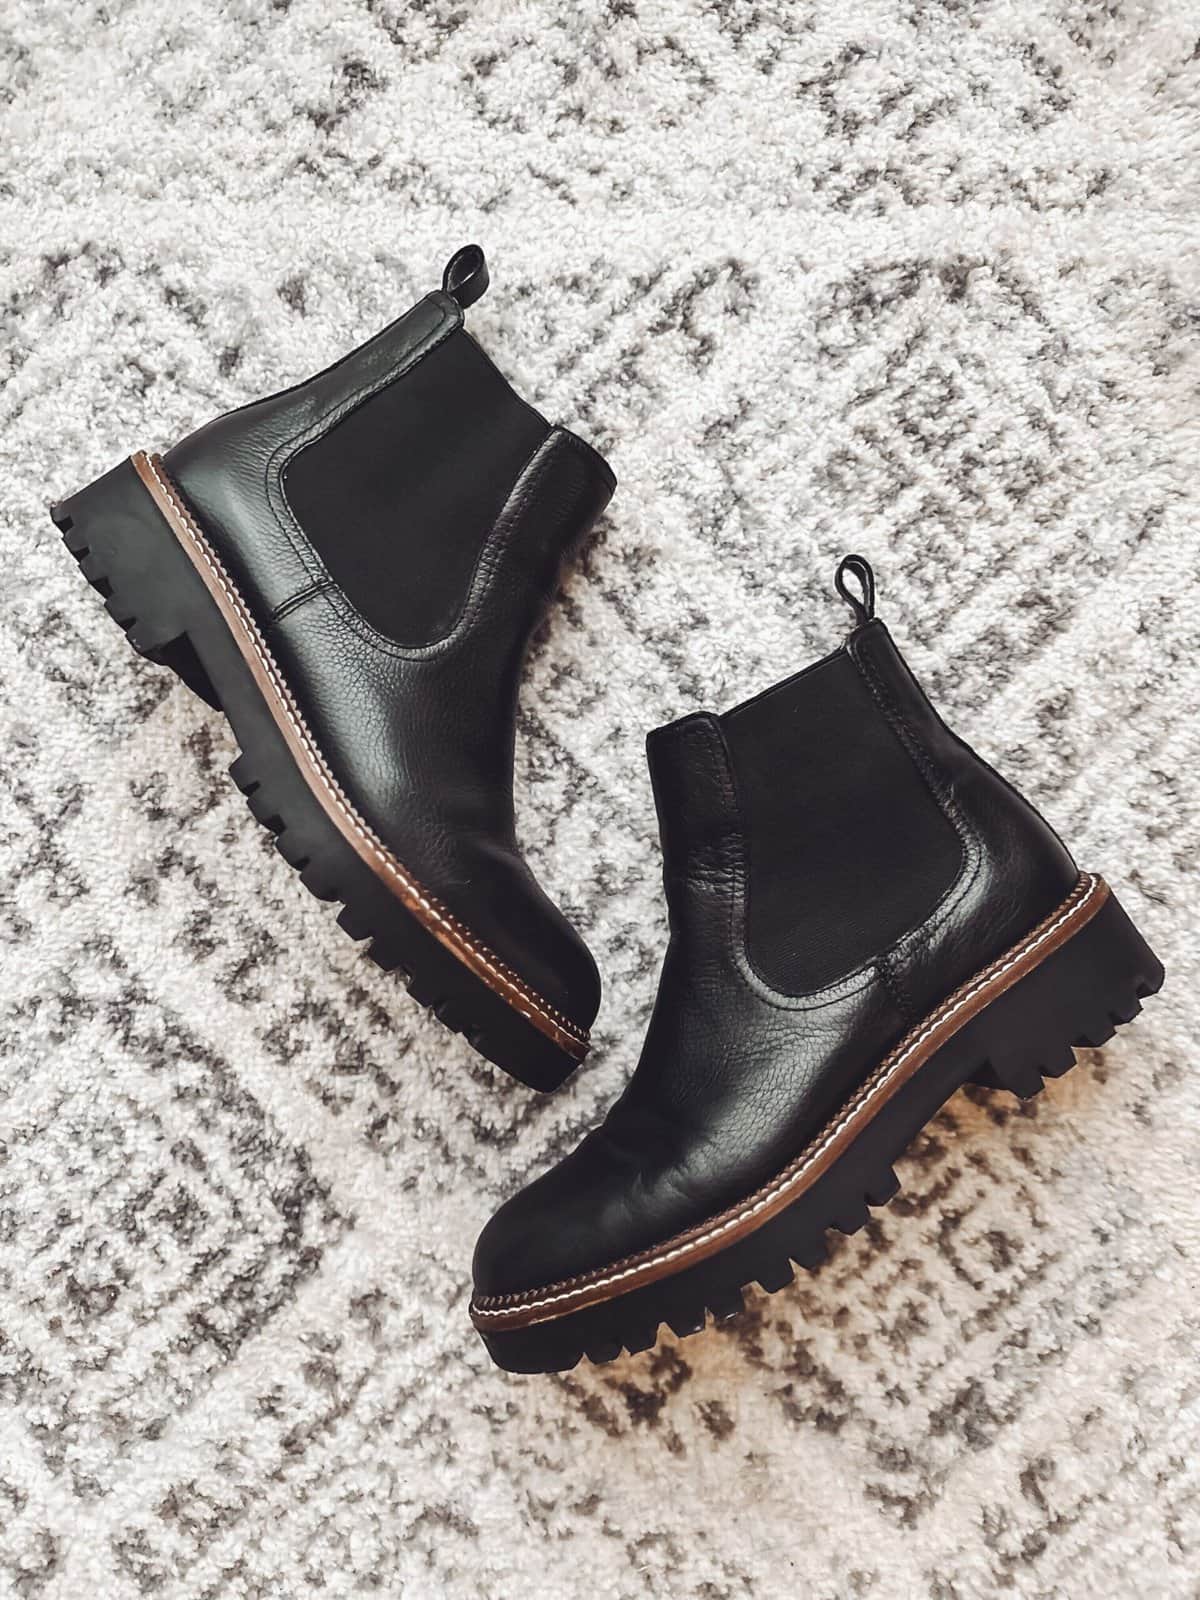 Top 2 chelsea boots at Nordstrom - both on sale right now! - Mint Arrow